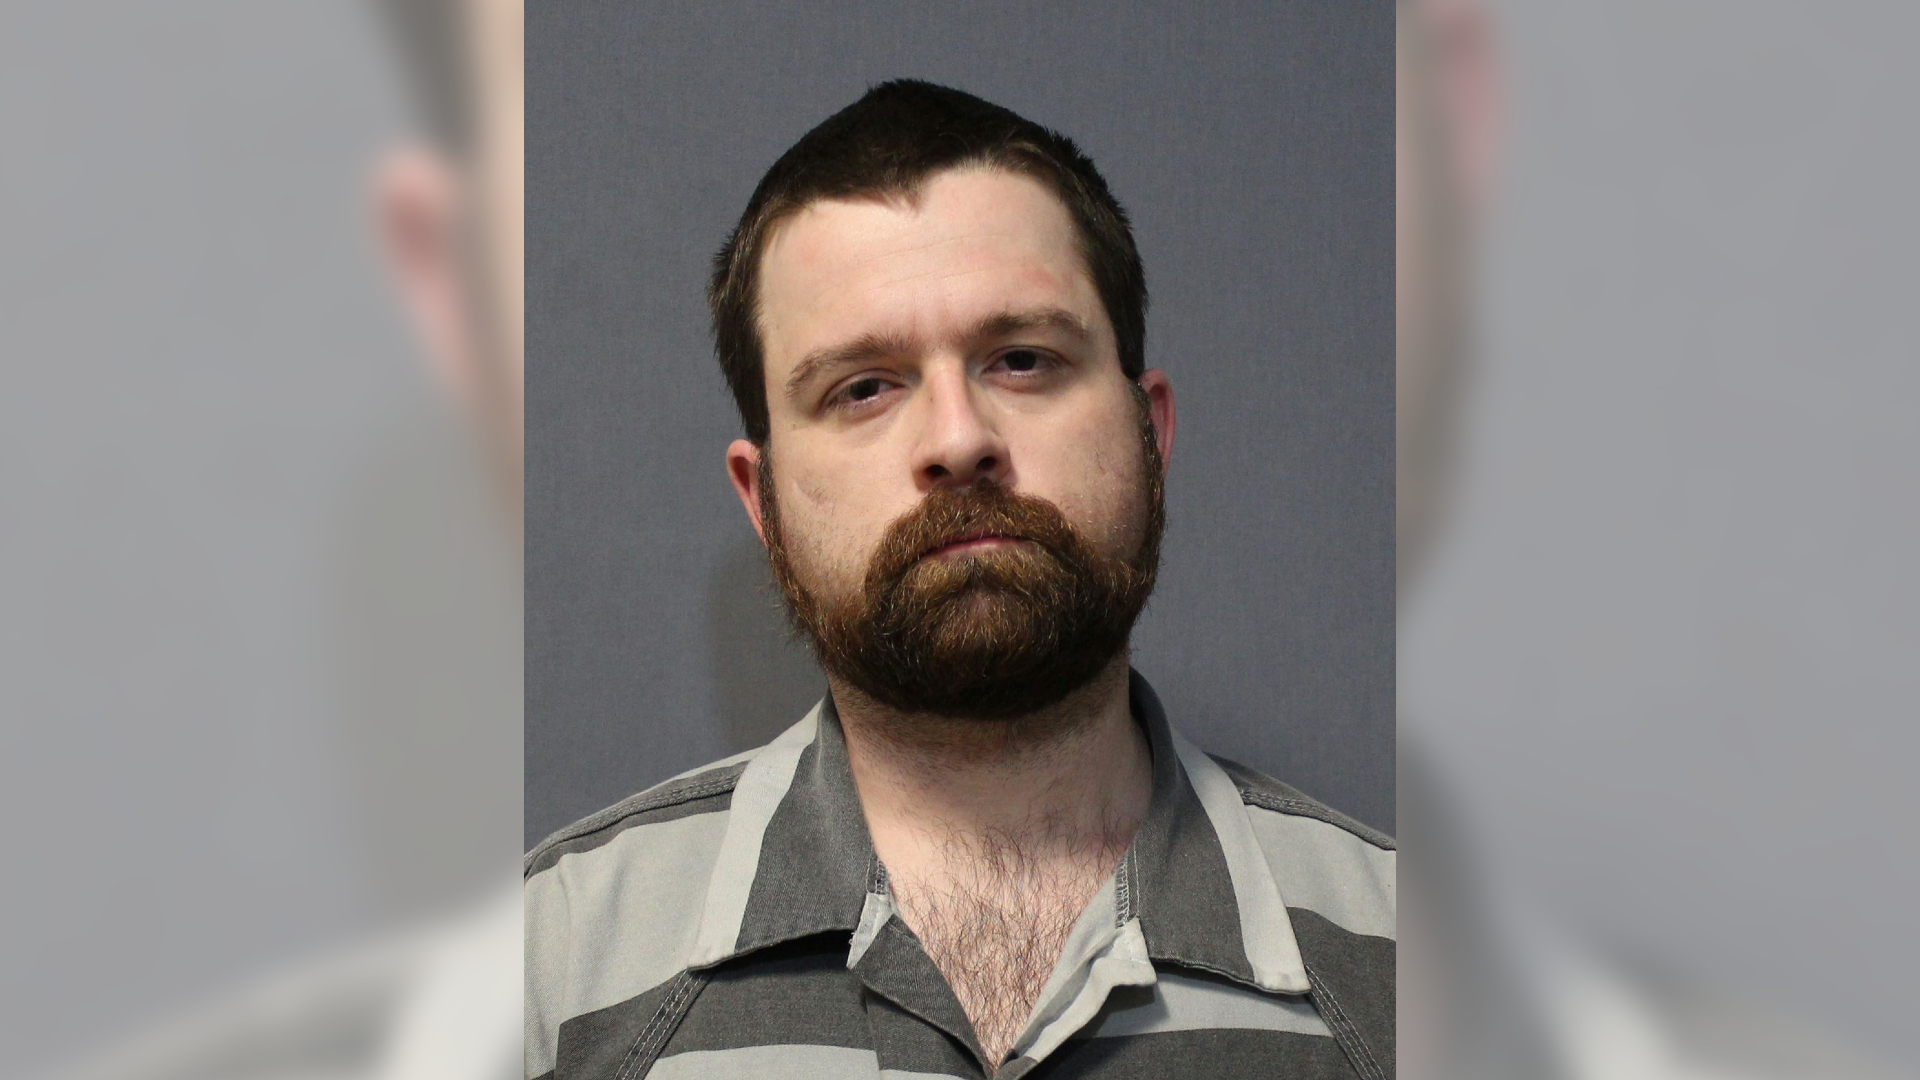 Monroe Man Arrested, Charged With Soliciting 14-Year-Old Girl Online